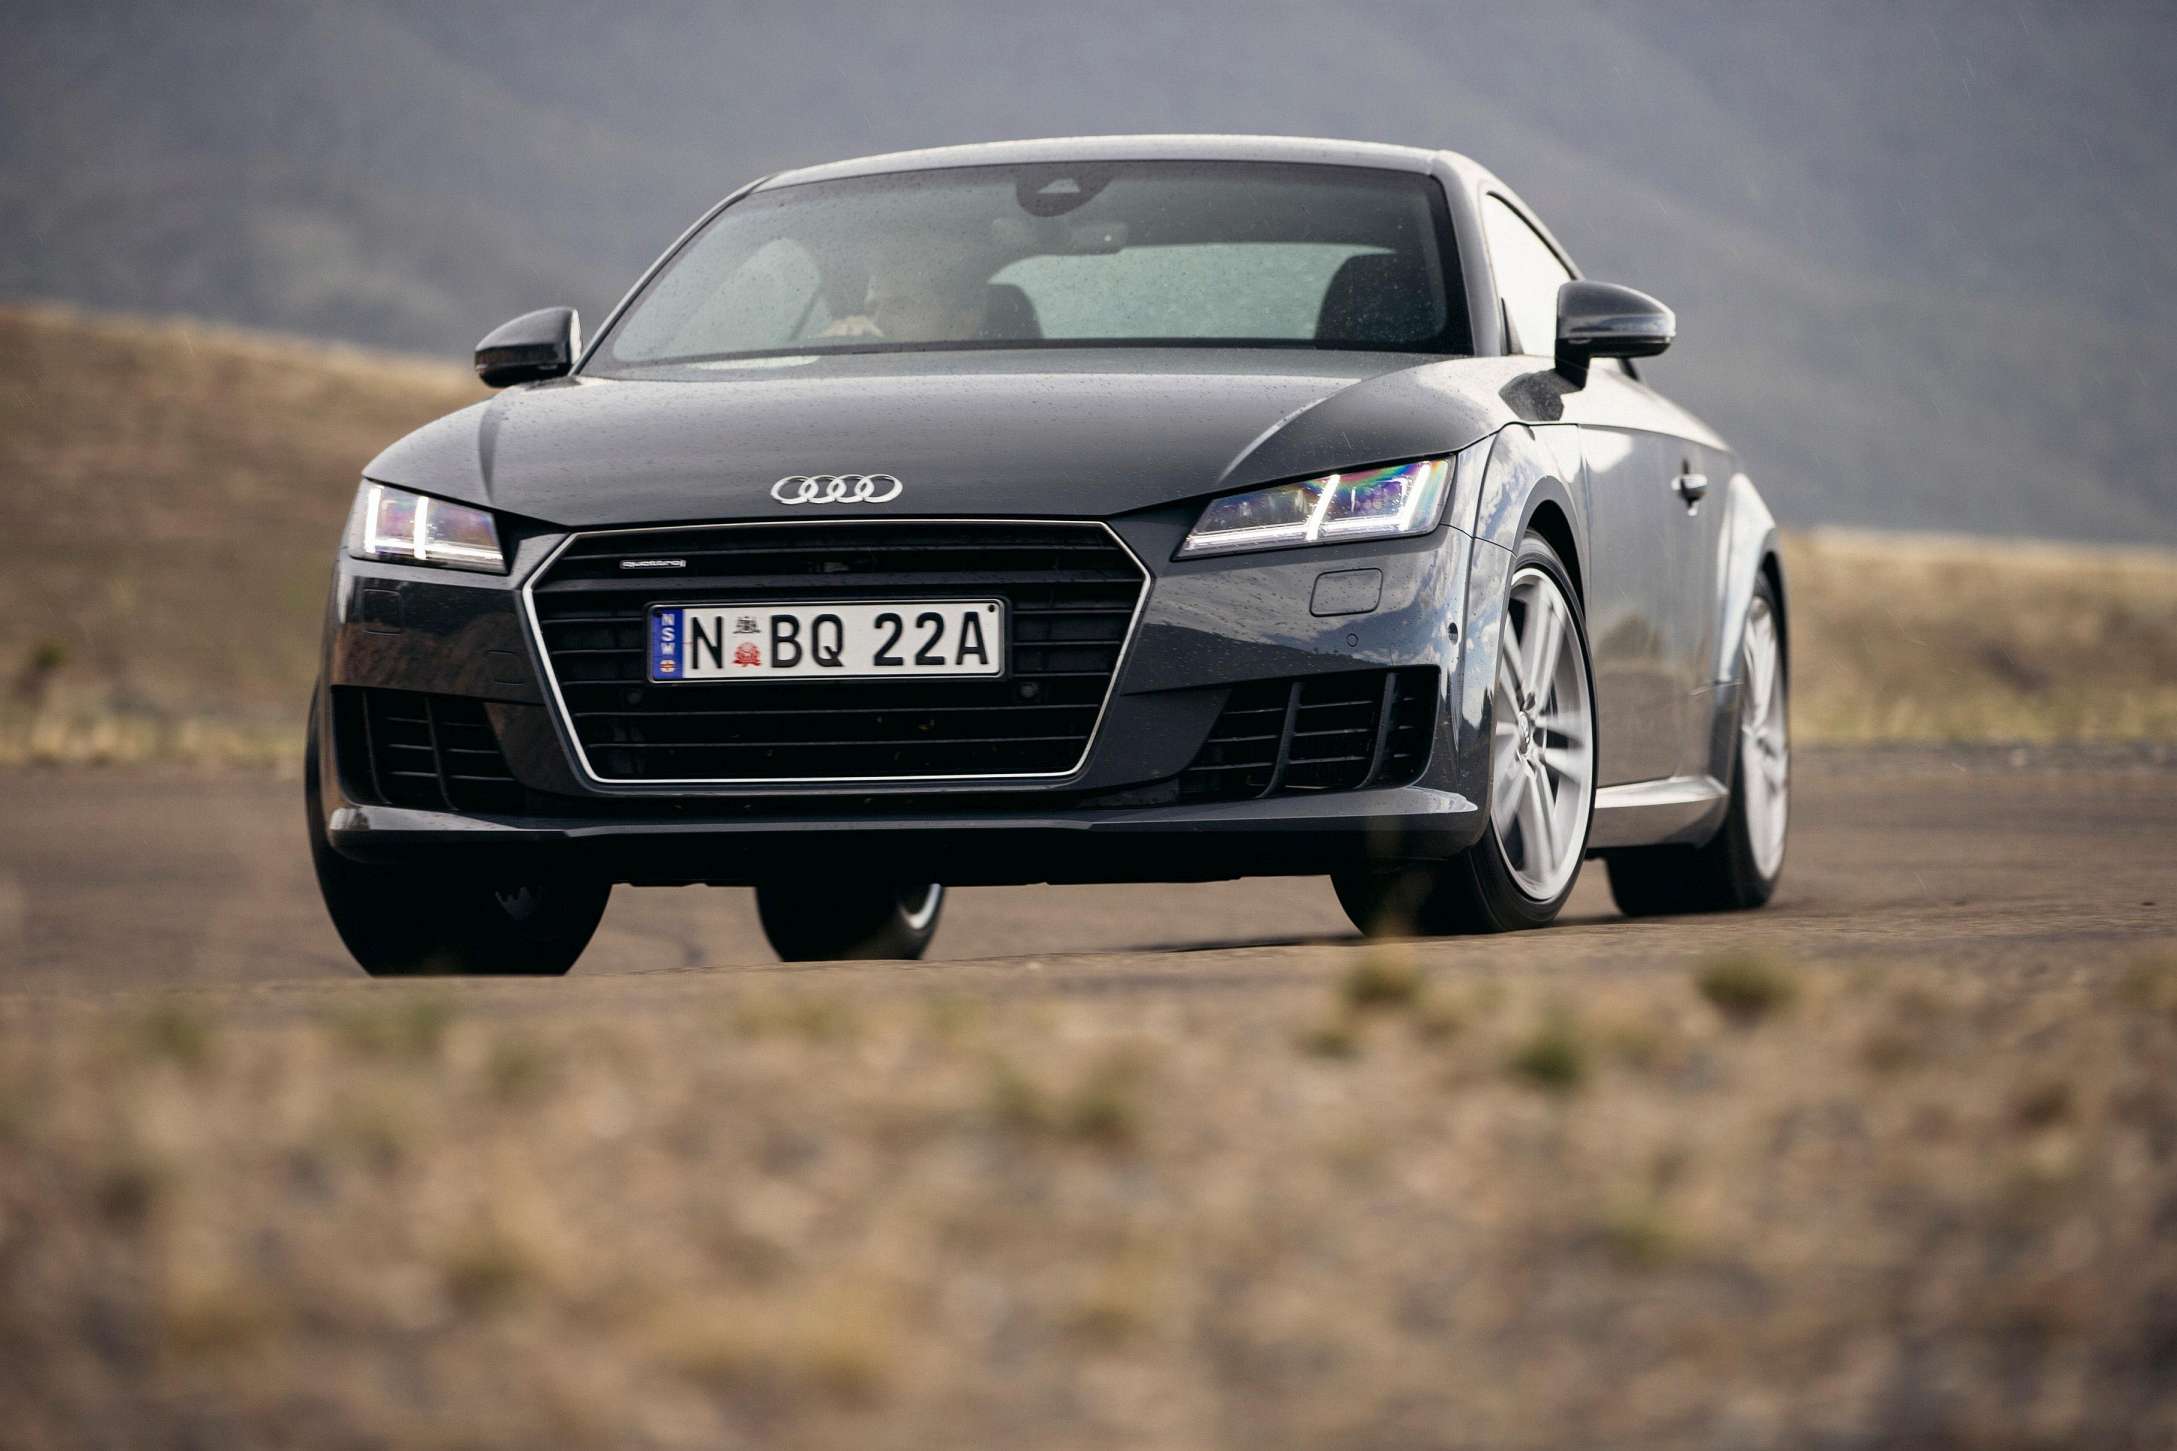 Audi TT III (8S) Coupe 2.0 AT (230 HP)